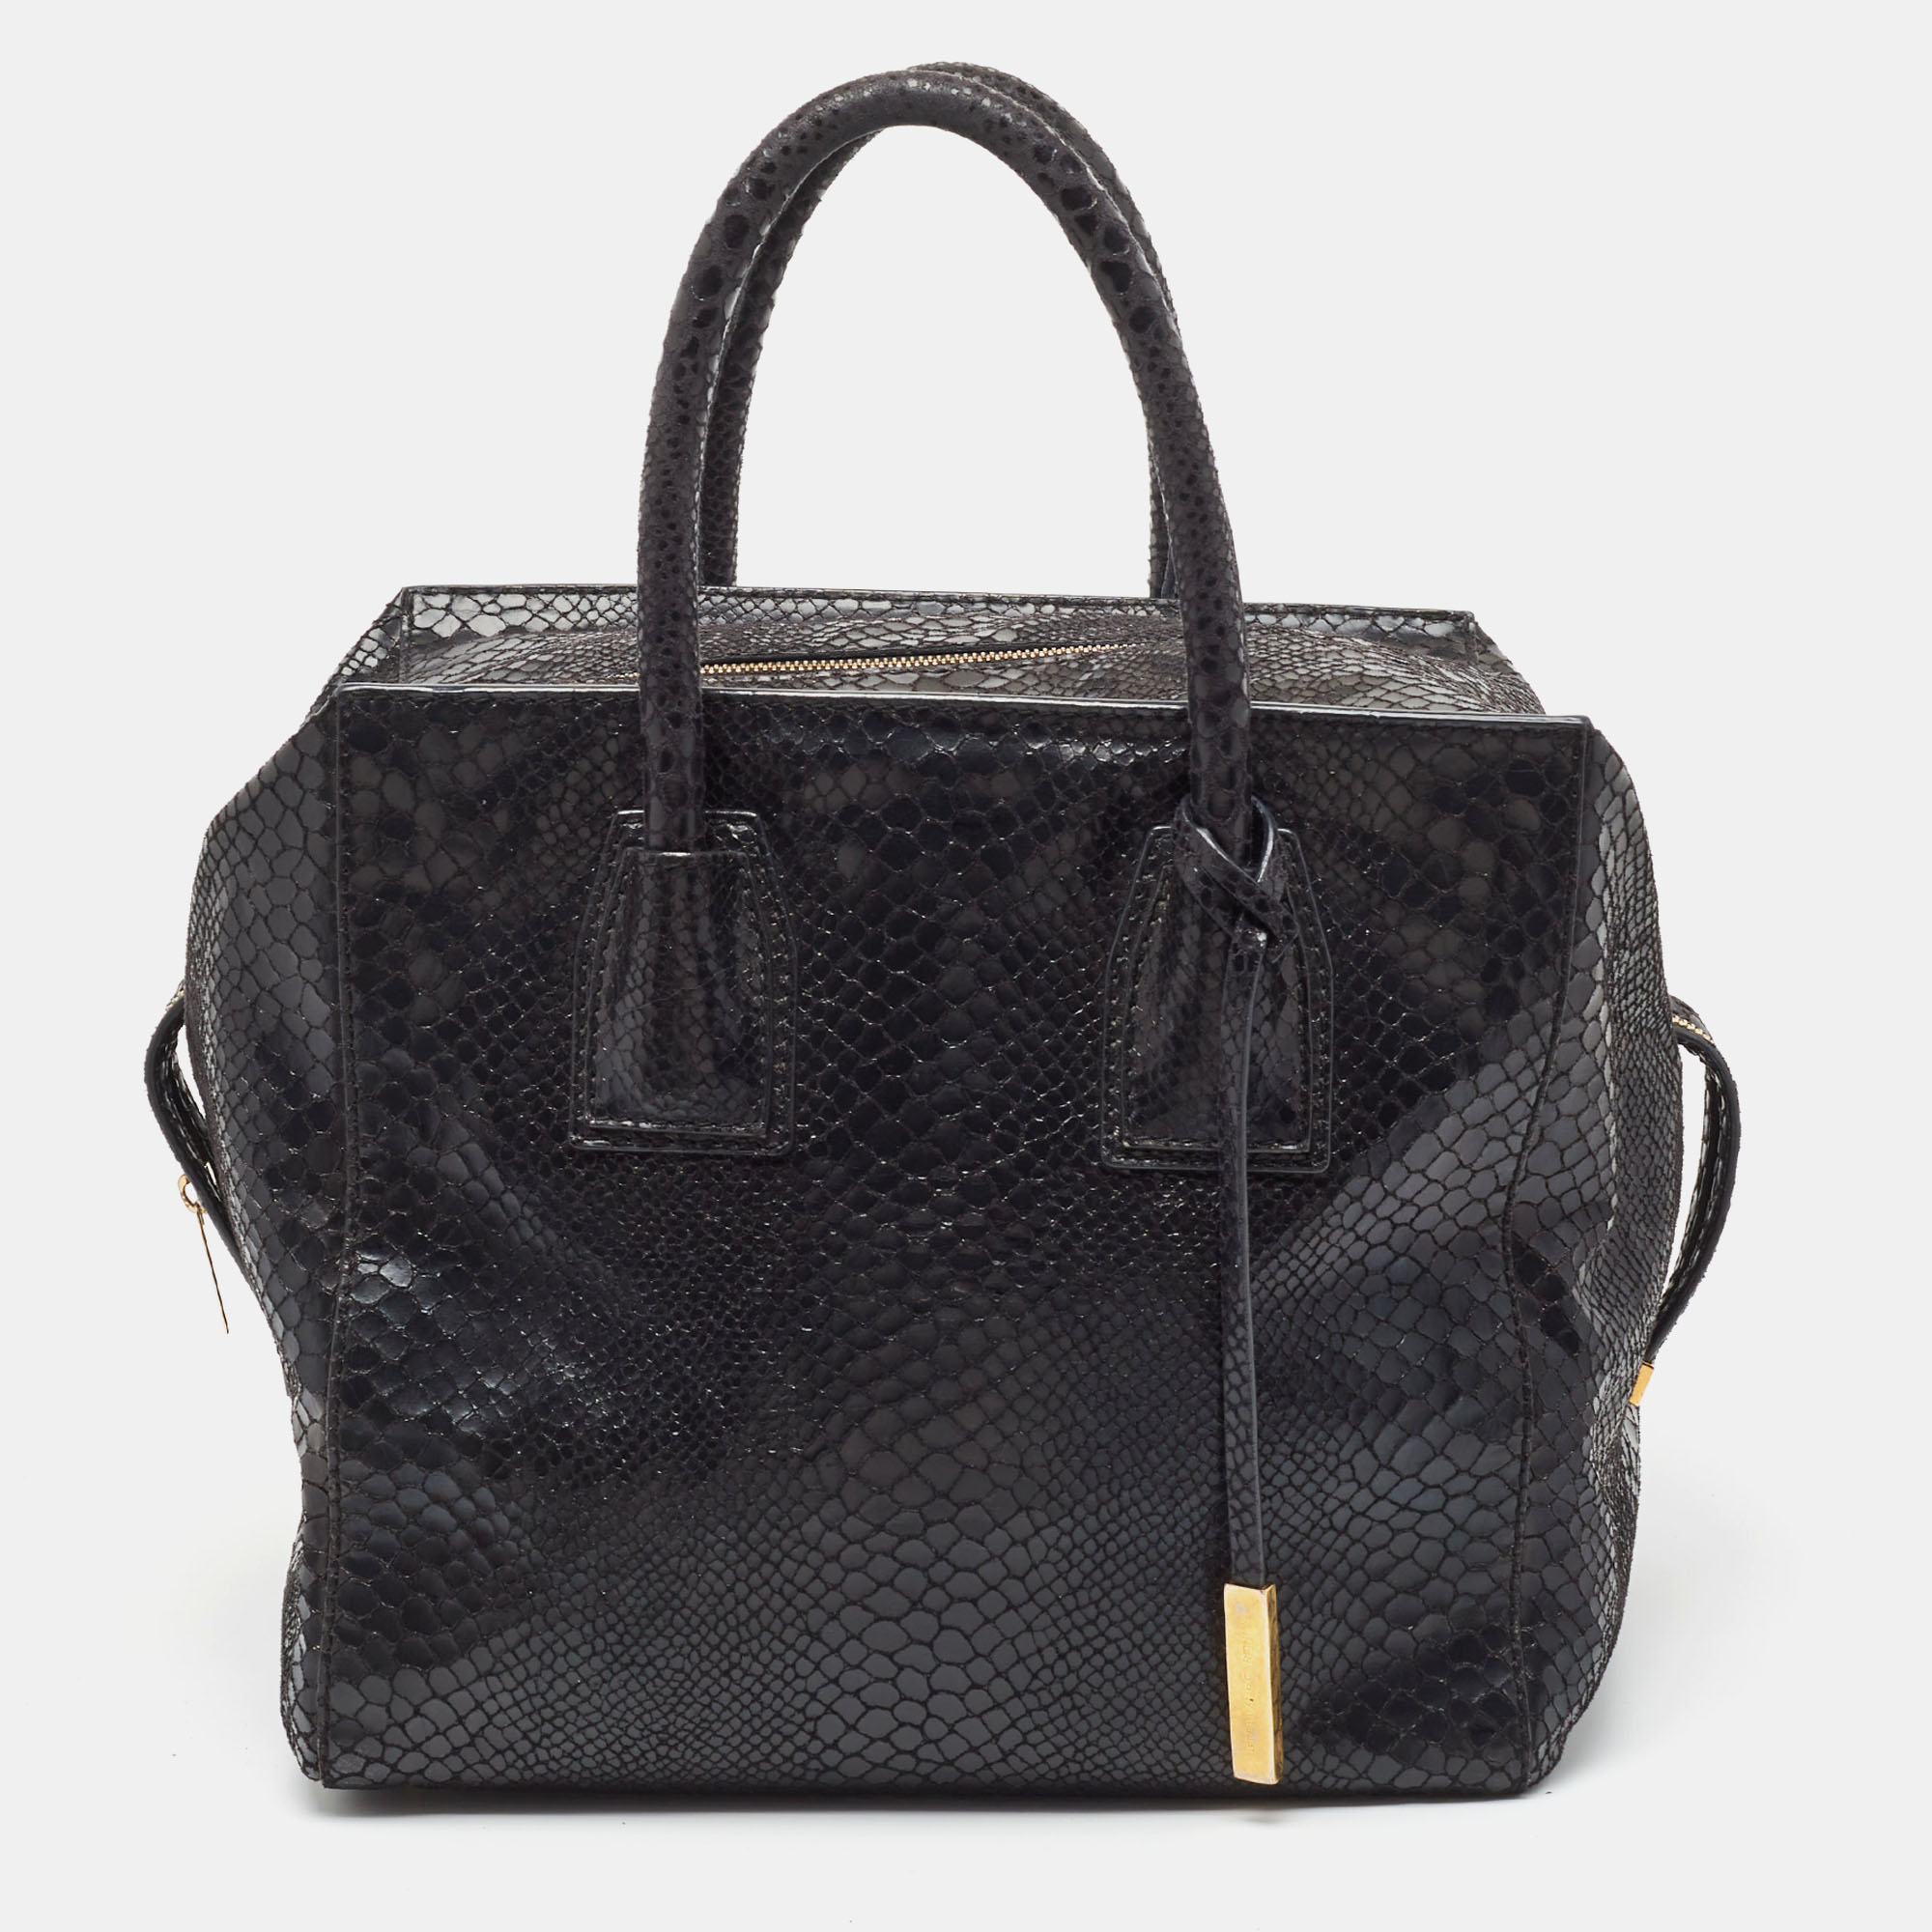 Made from black faux snakeskin embossed leather and a faux suede interior this bag can effortlessly be fashioned with both off duty and formal looks. The excellent craftsmanship of this Stella Mc Cartney piece ensures a fine finish and a rich appeal.